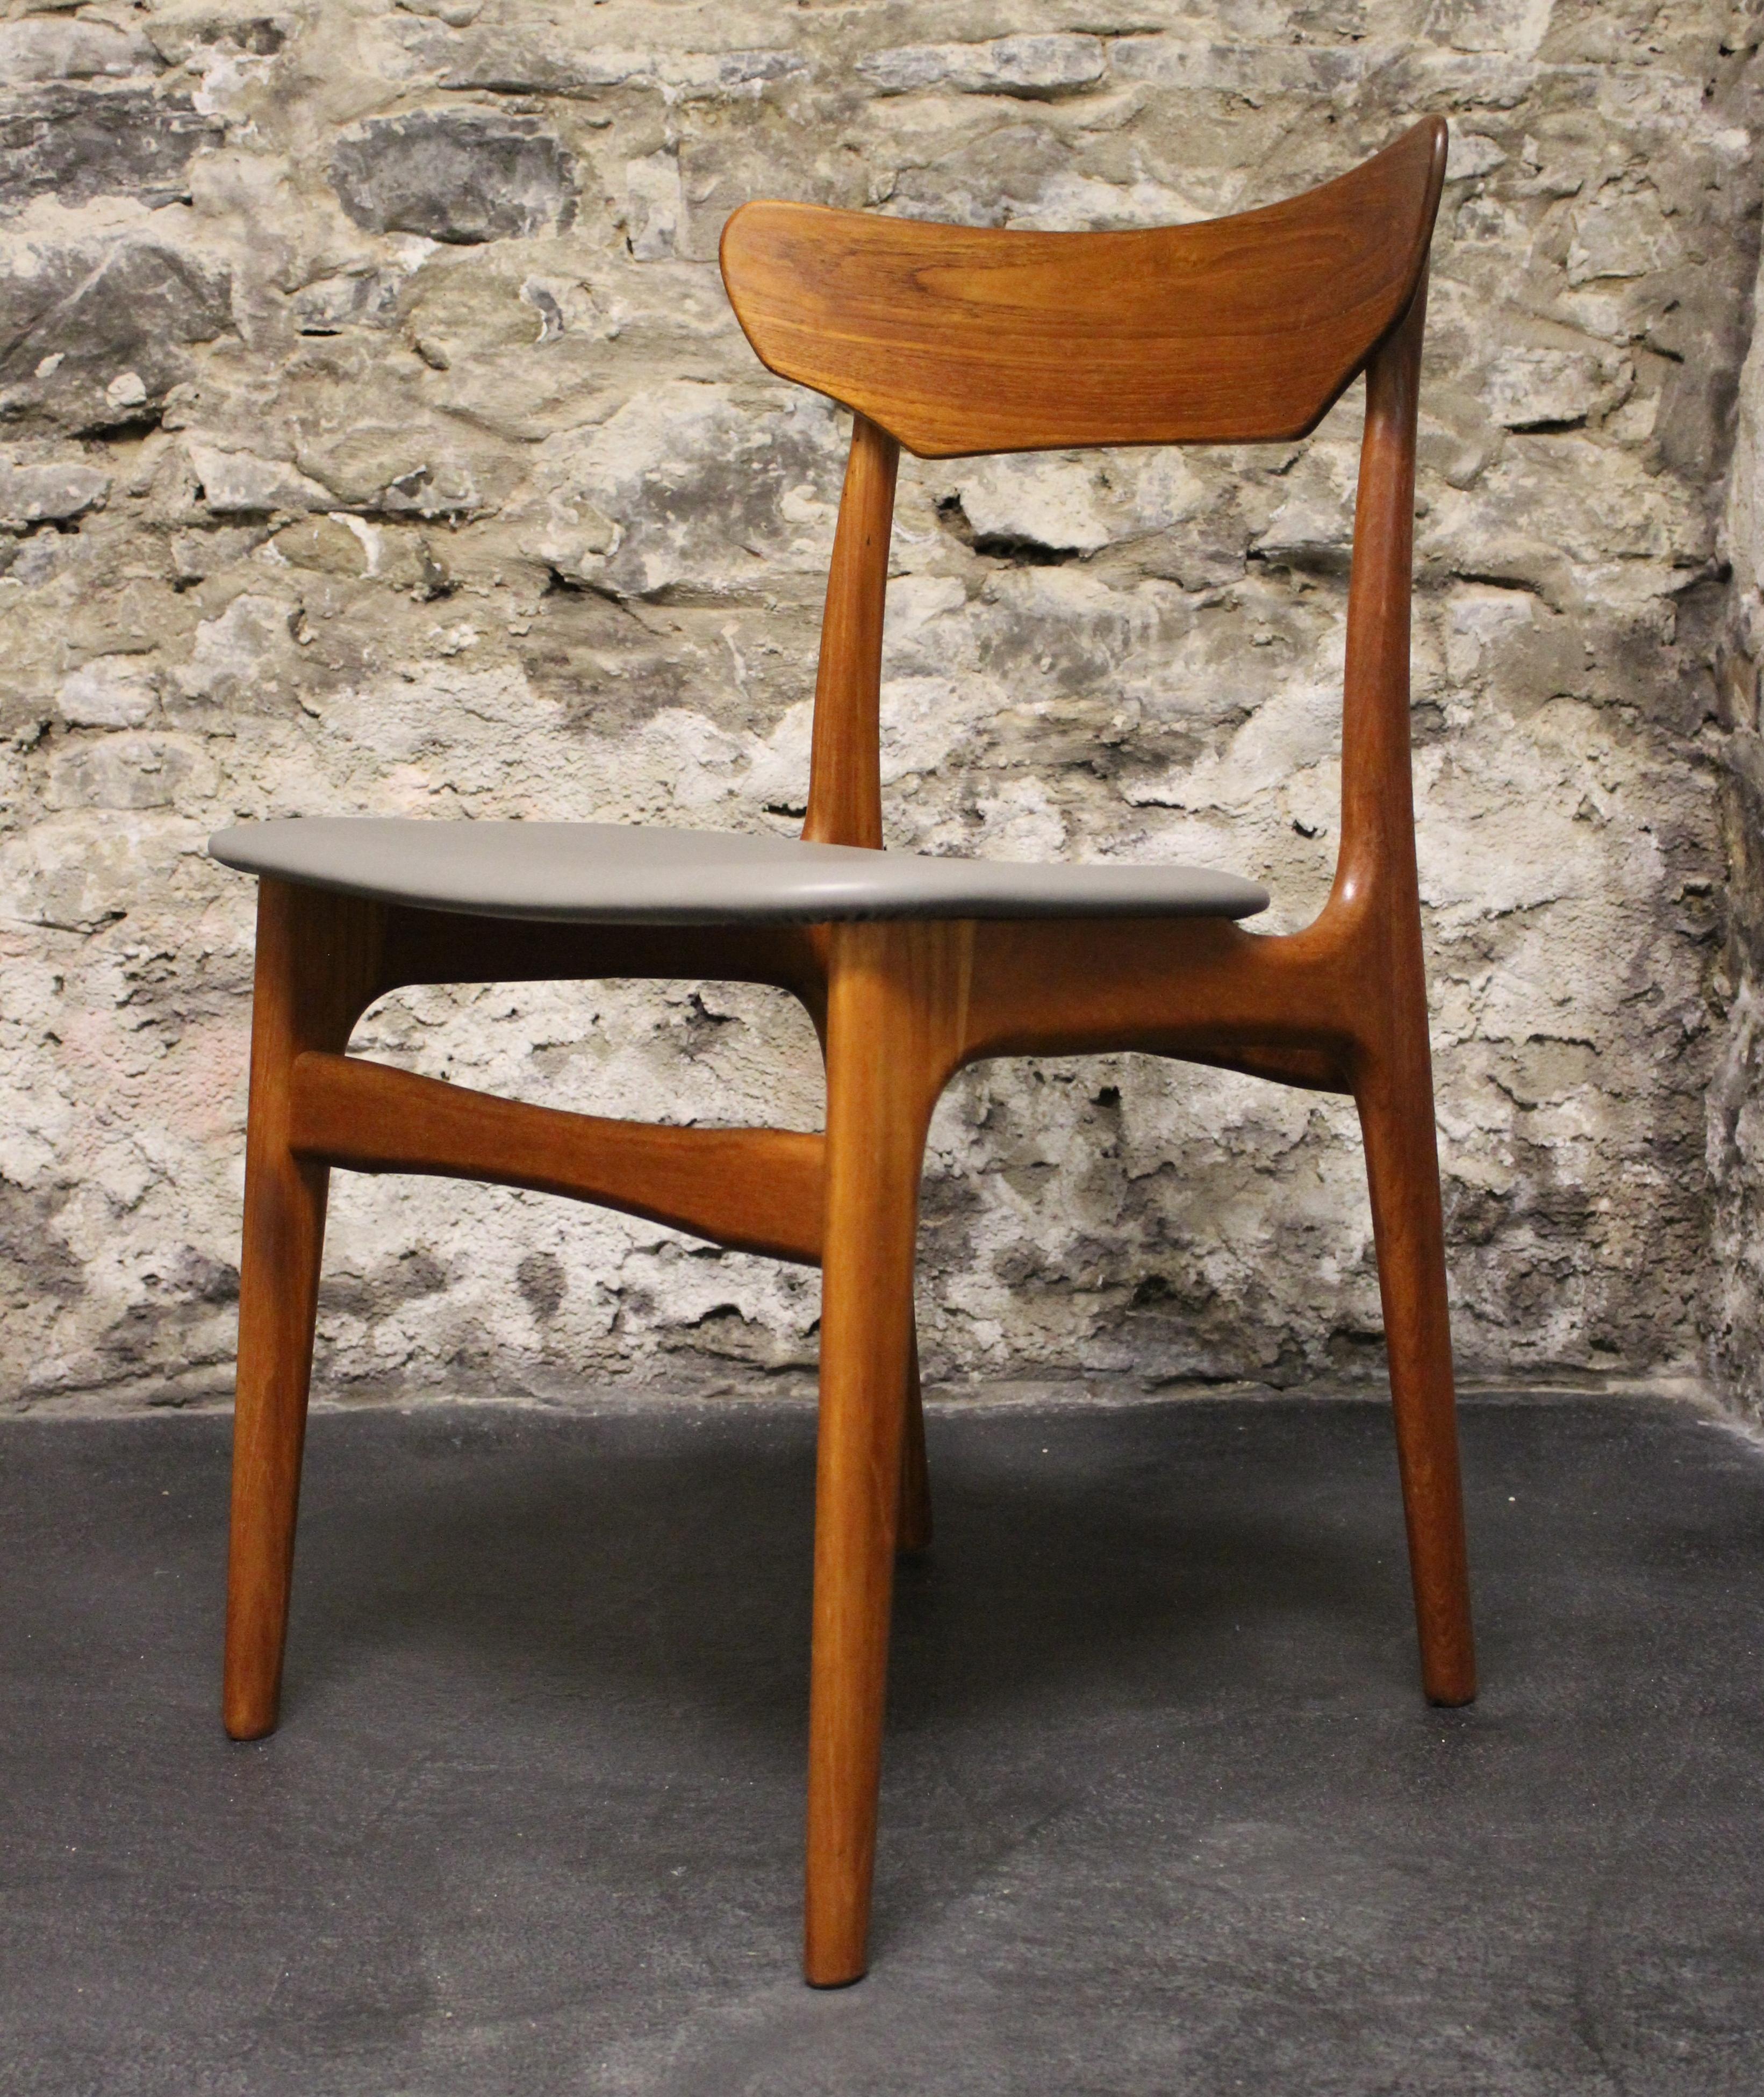 Four Danish teak dining chair by Schionning and Elgaard for Randers. Newly upholstered in leather.